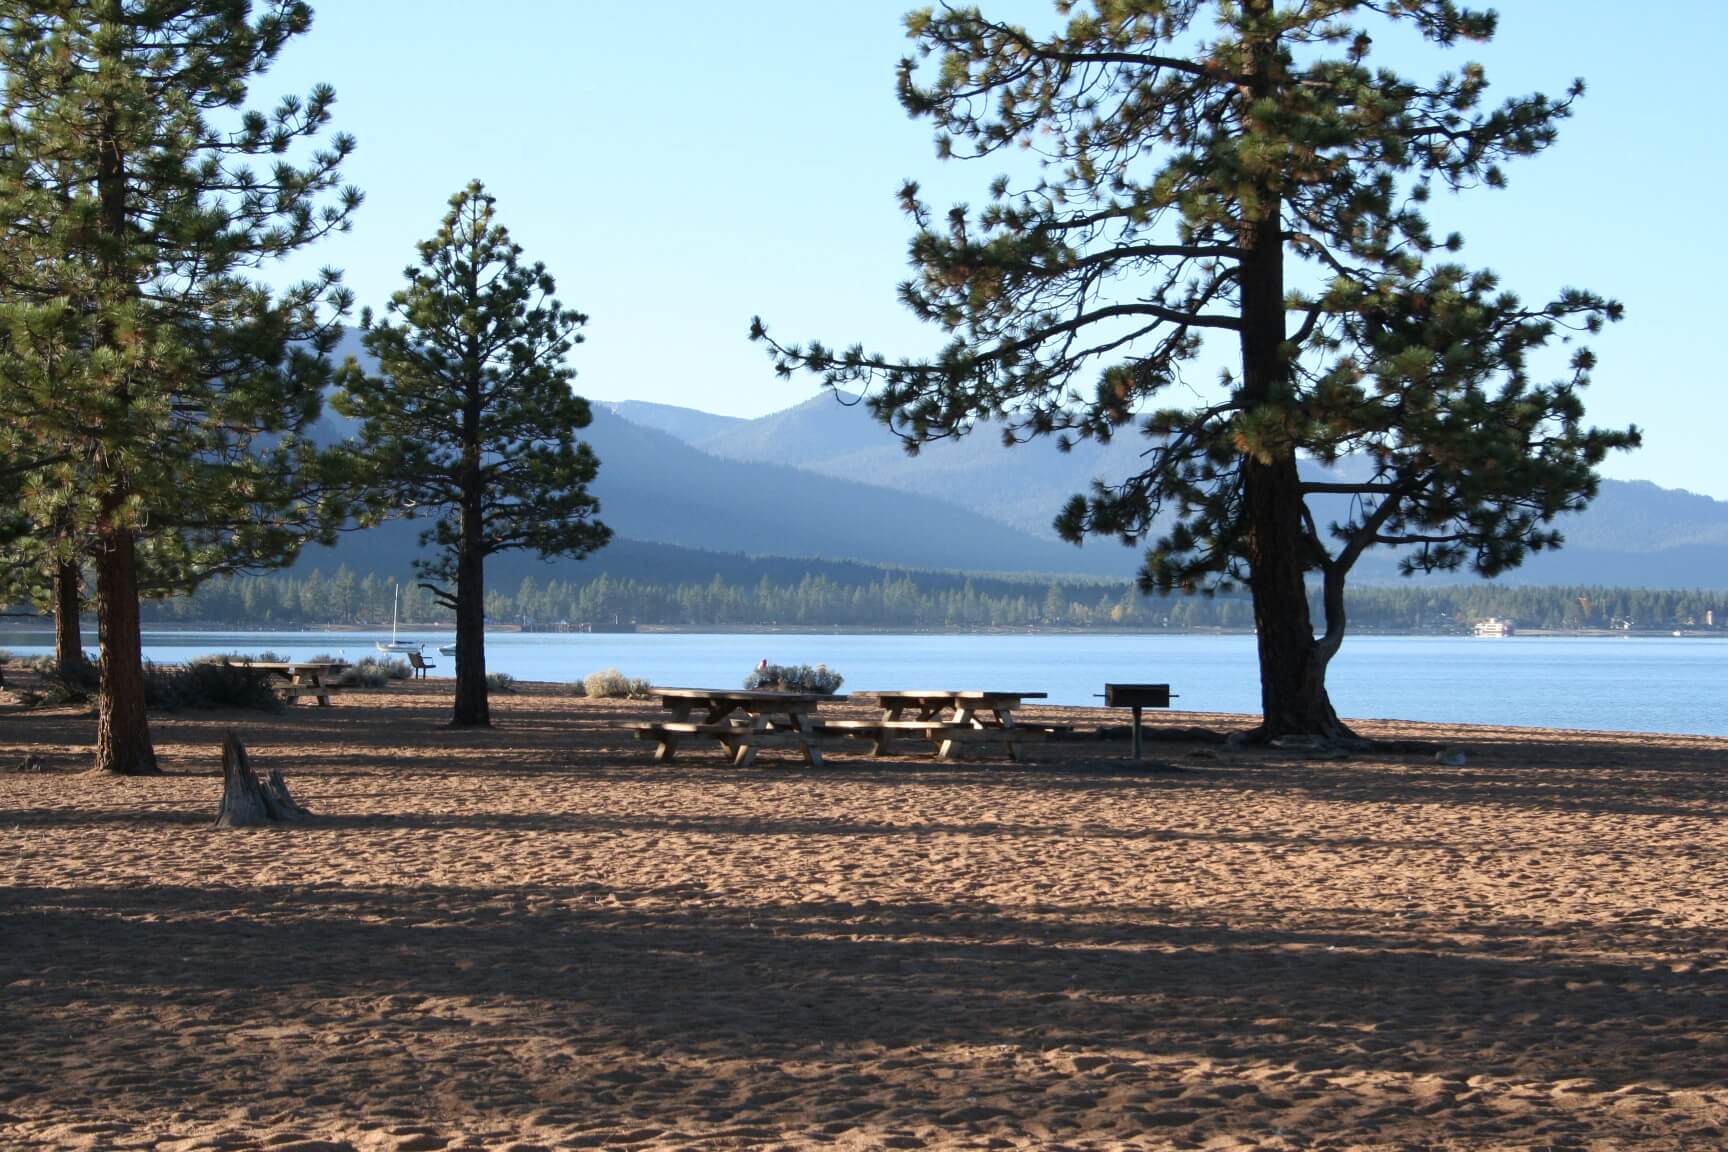 10 Best Lake Tahoe Campgrounds - Nevada Beach Picnic Area